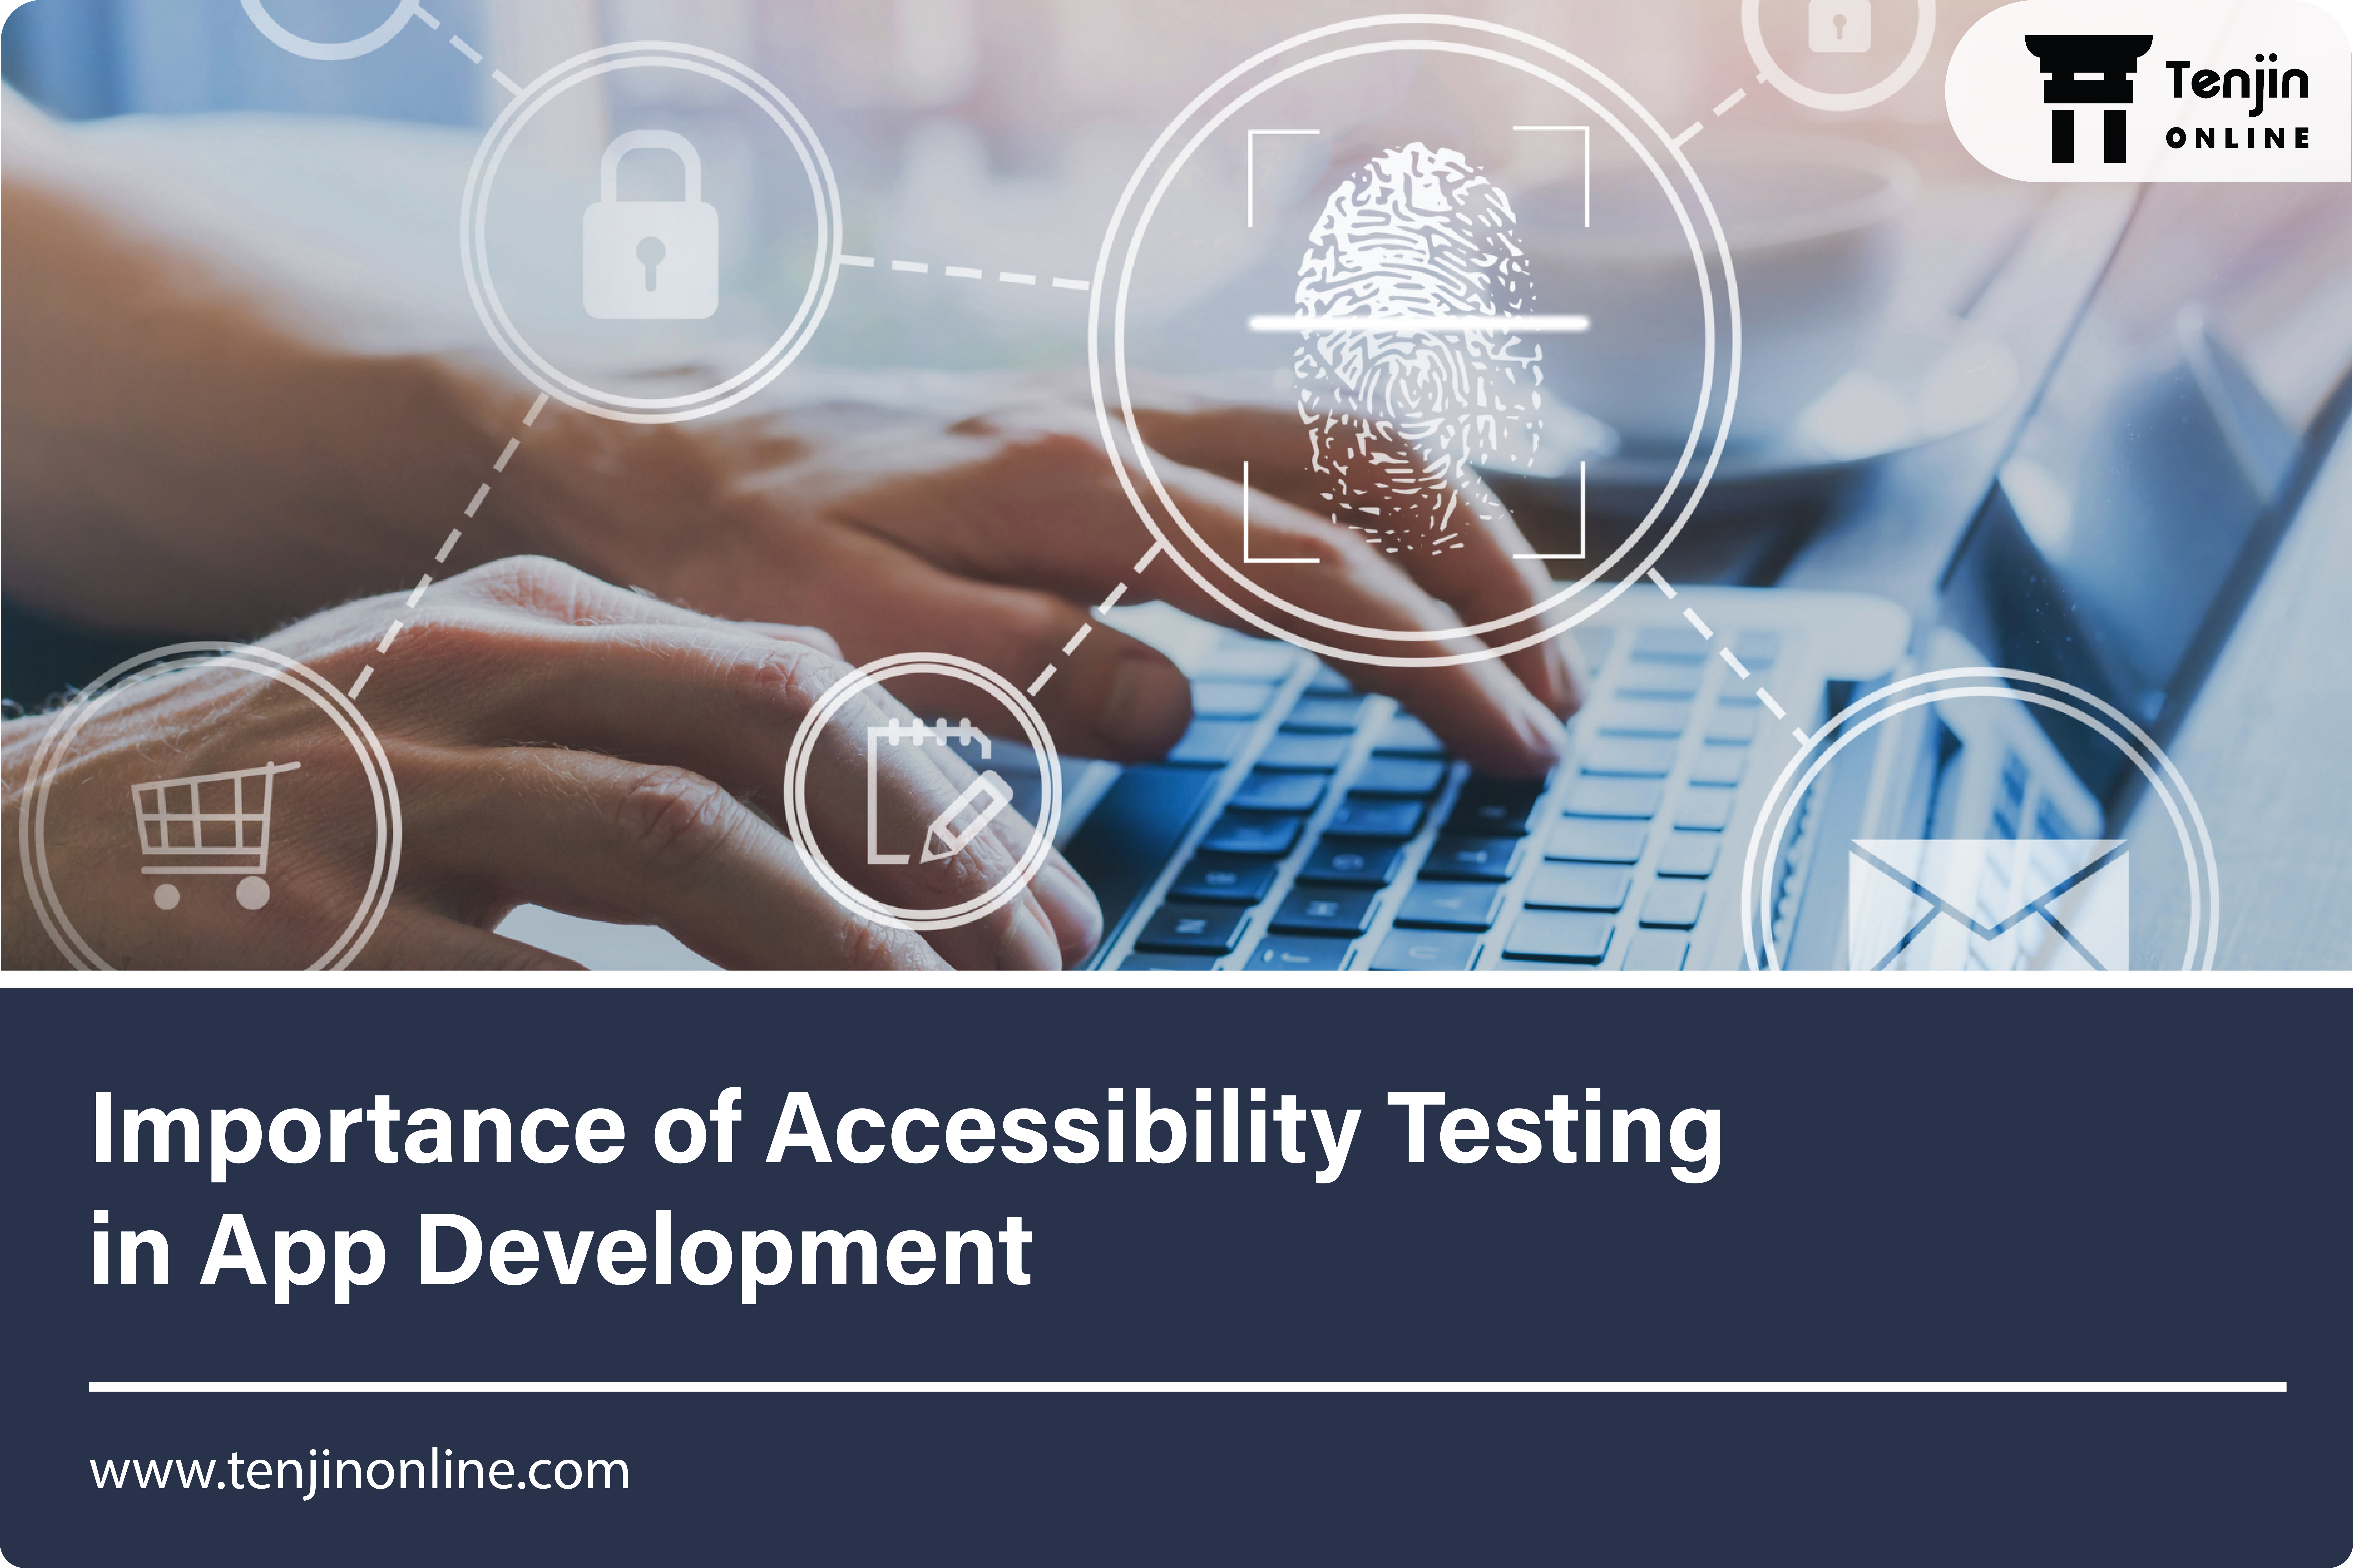 Importance of Accessibility testing in app development